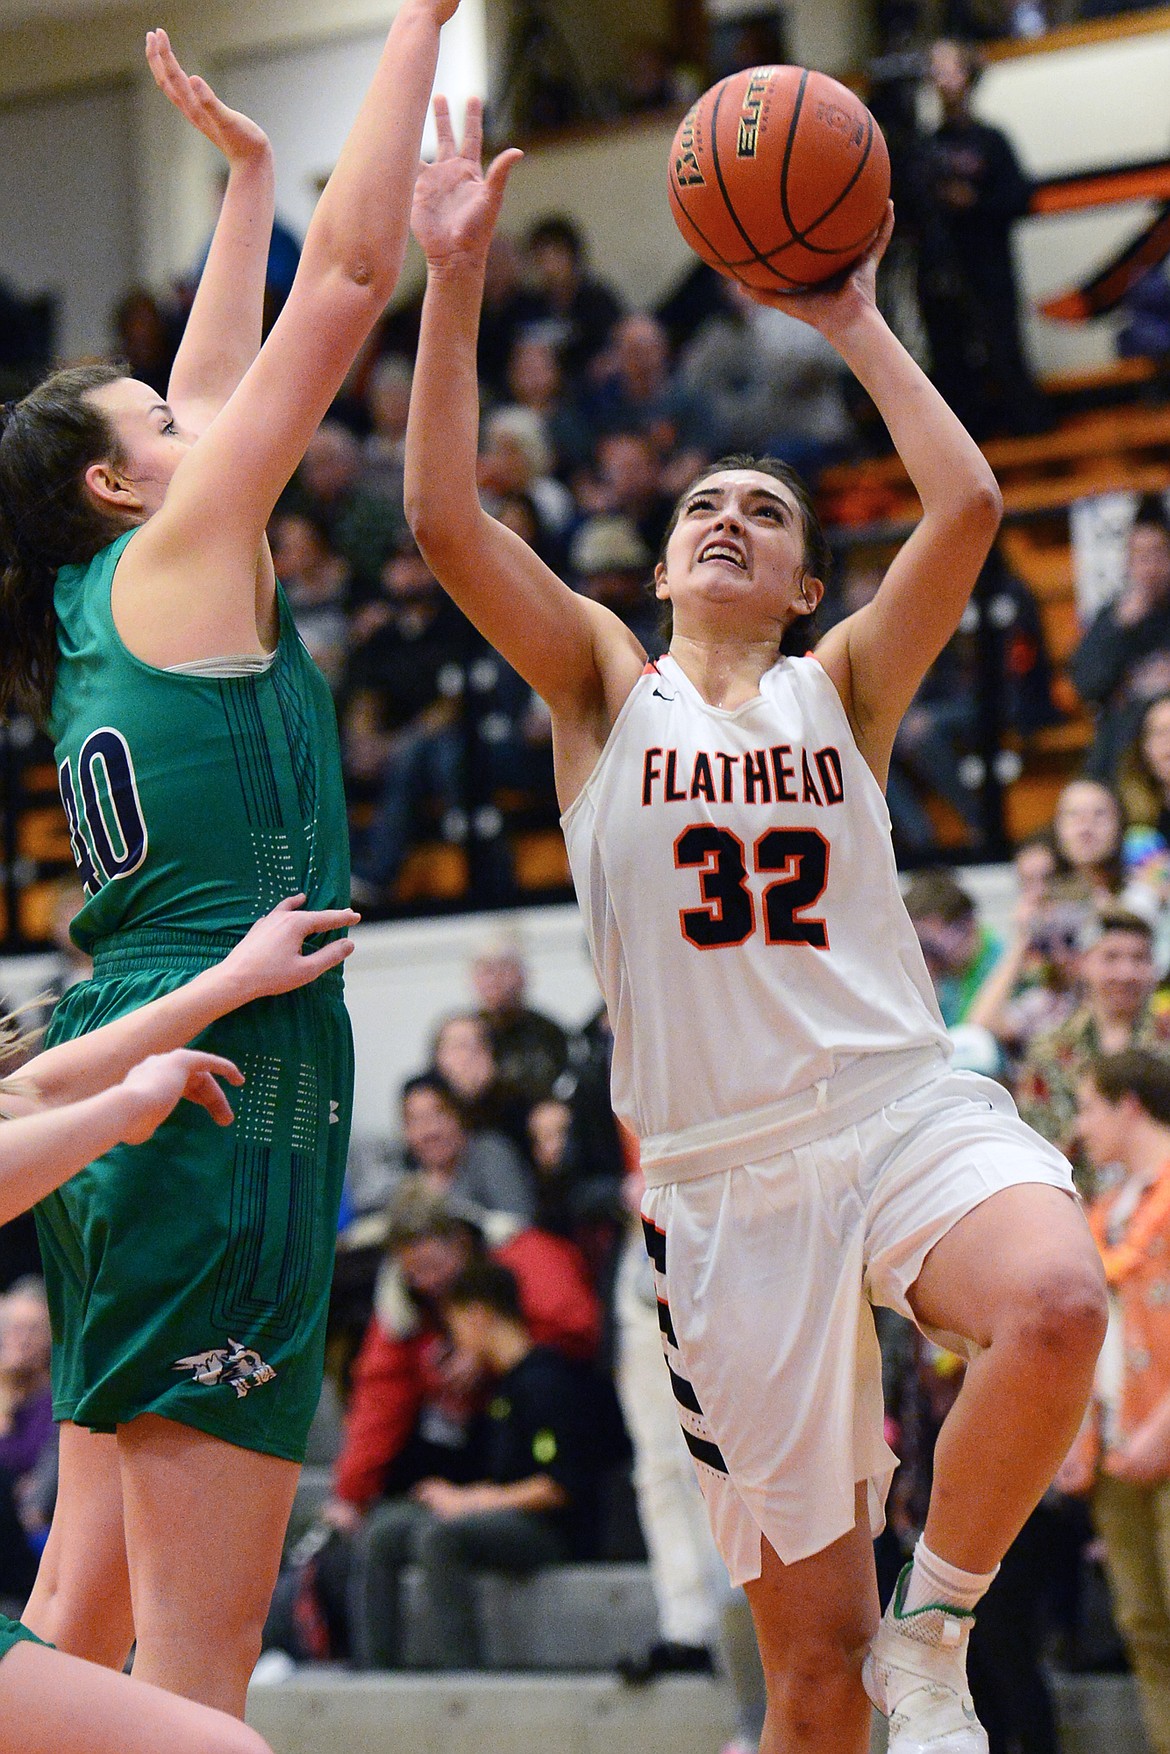 Flathead's Taylor Henley (32) drives to the hoop against Glacier's Raley Shirey (40) during a crosstown matchup at Flathead High School on Tuesday. (Casey Kreider/Daily Inter Lake)